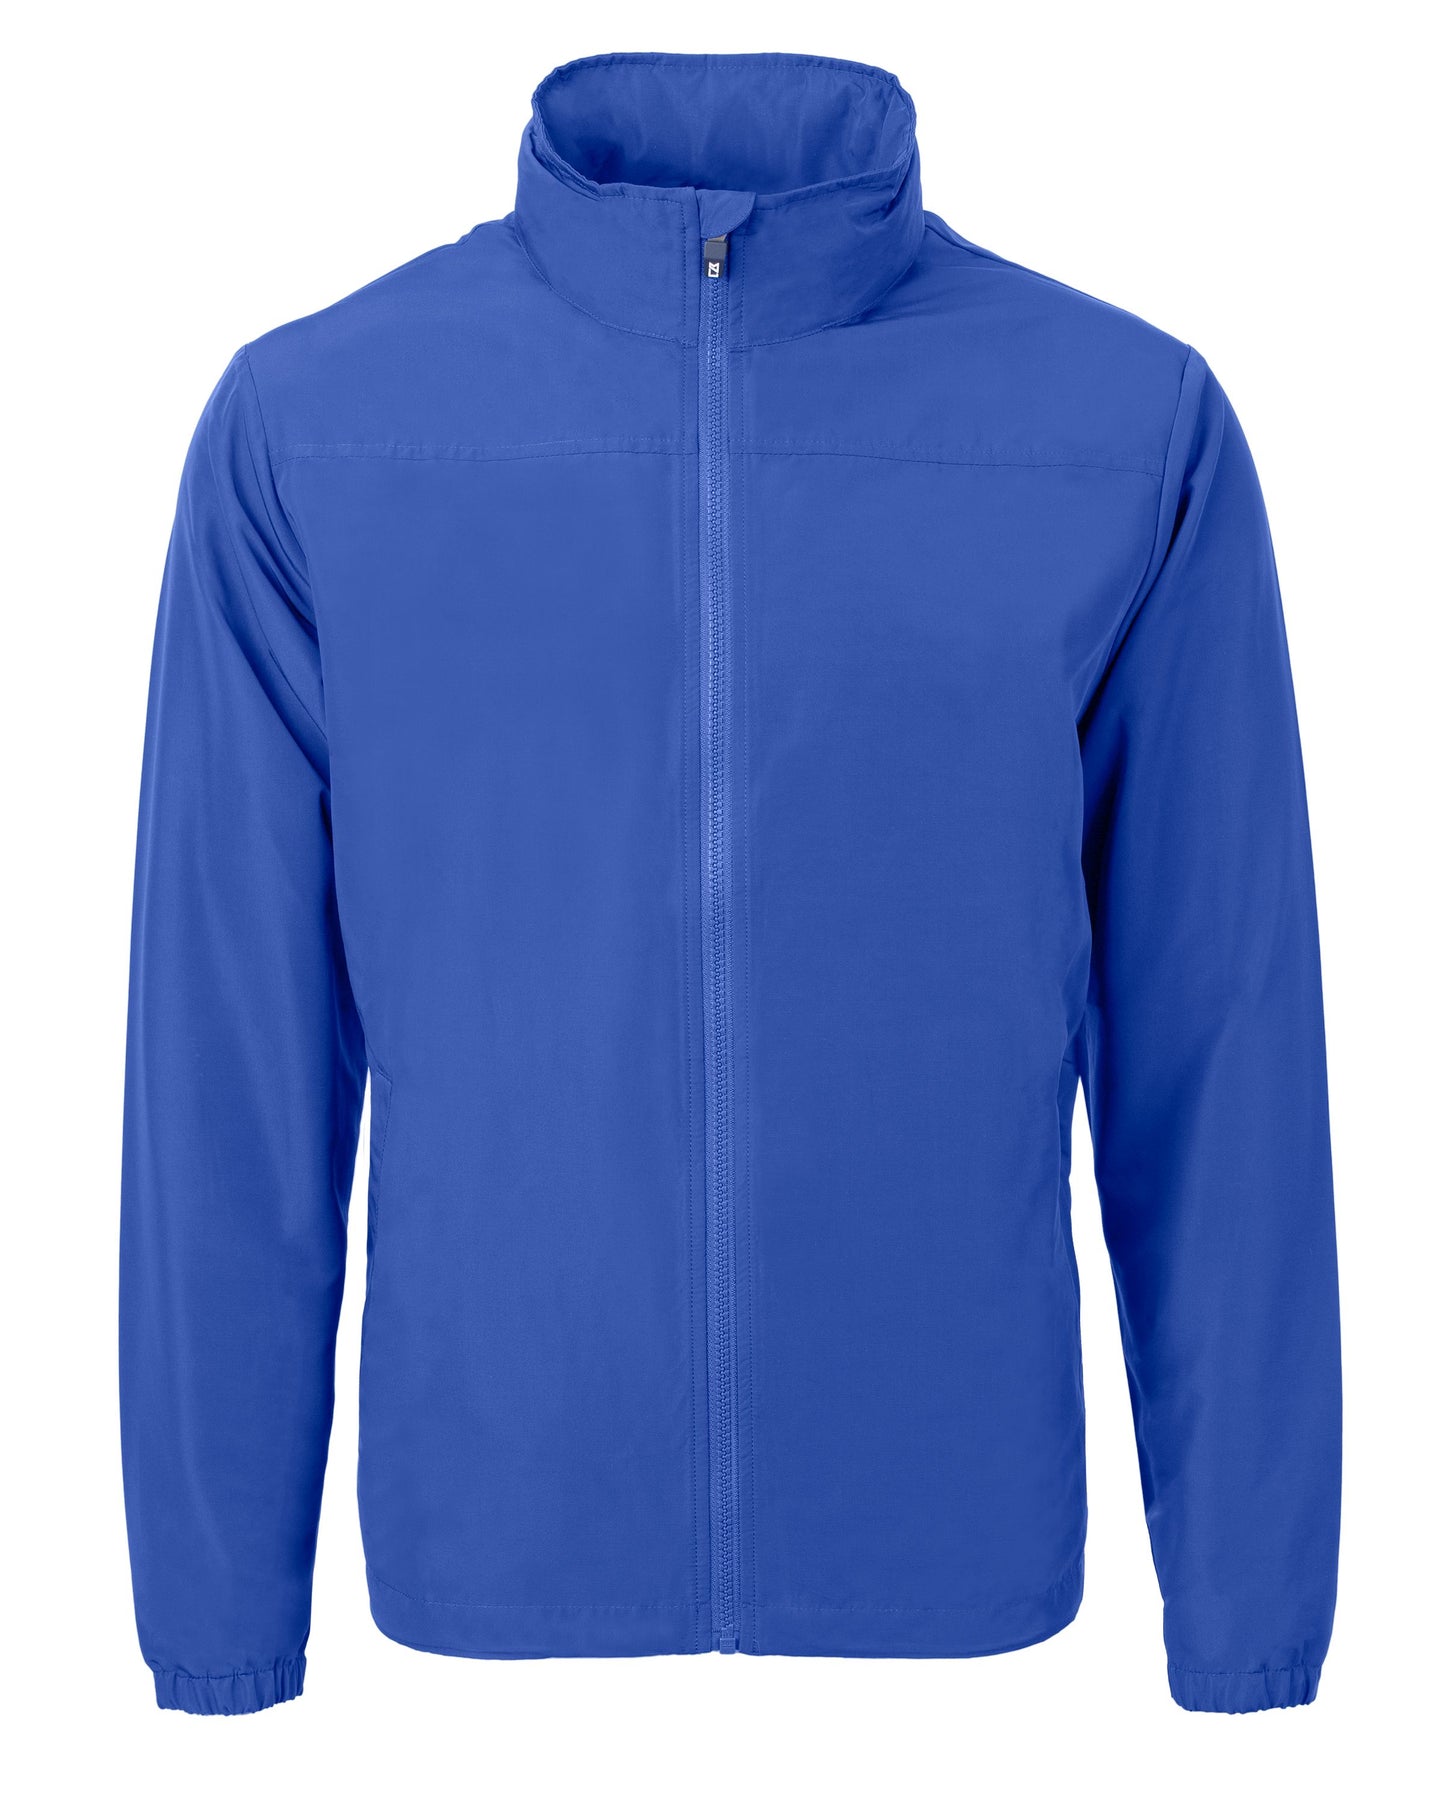 Cutter & Buck Charter Eco Knit Recycled Full-Zip Jacket Tour Blue